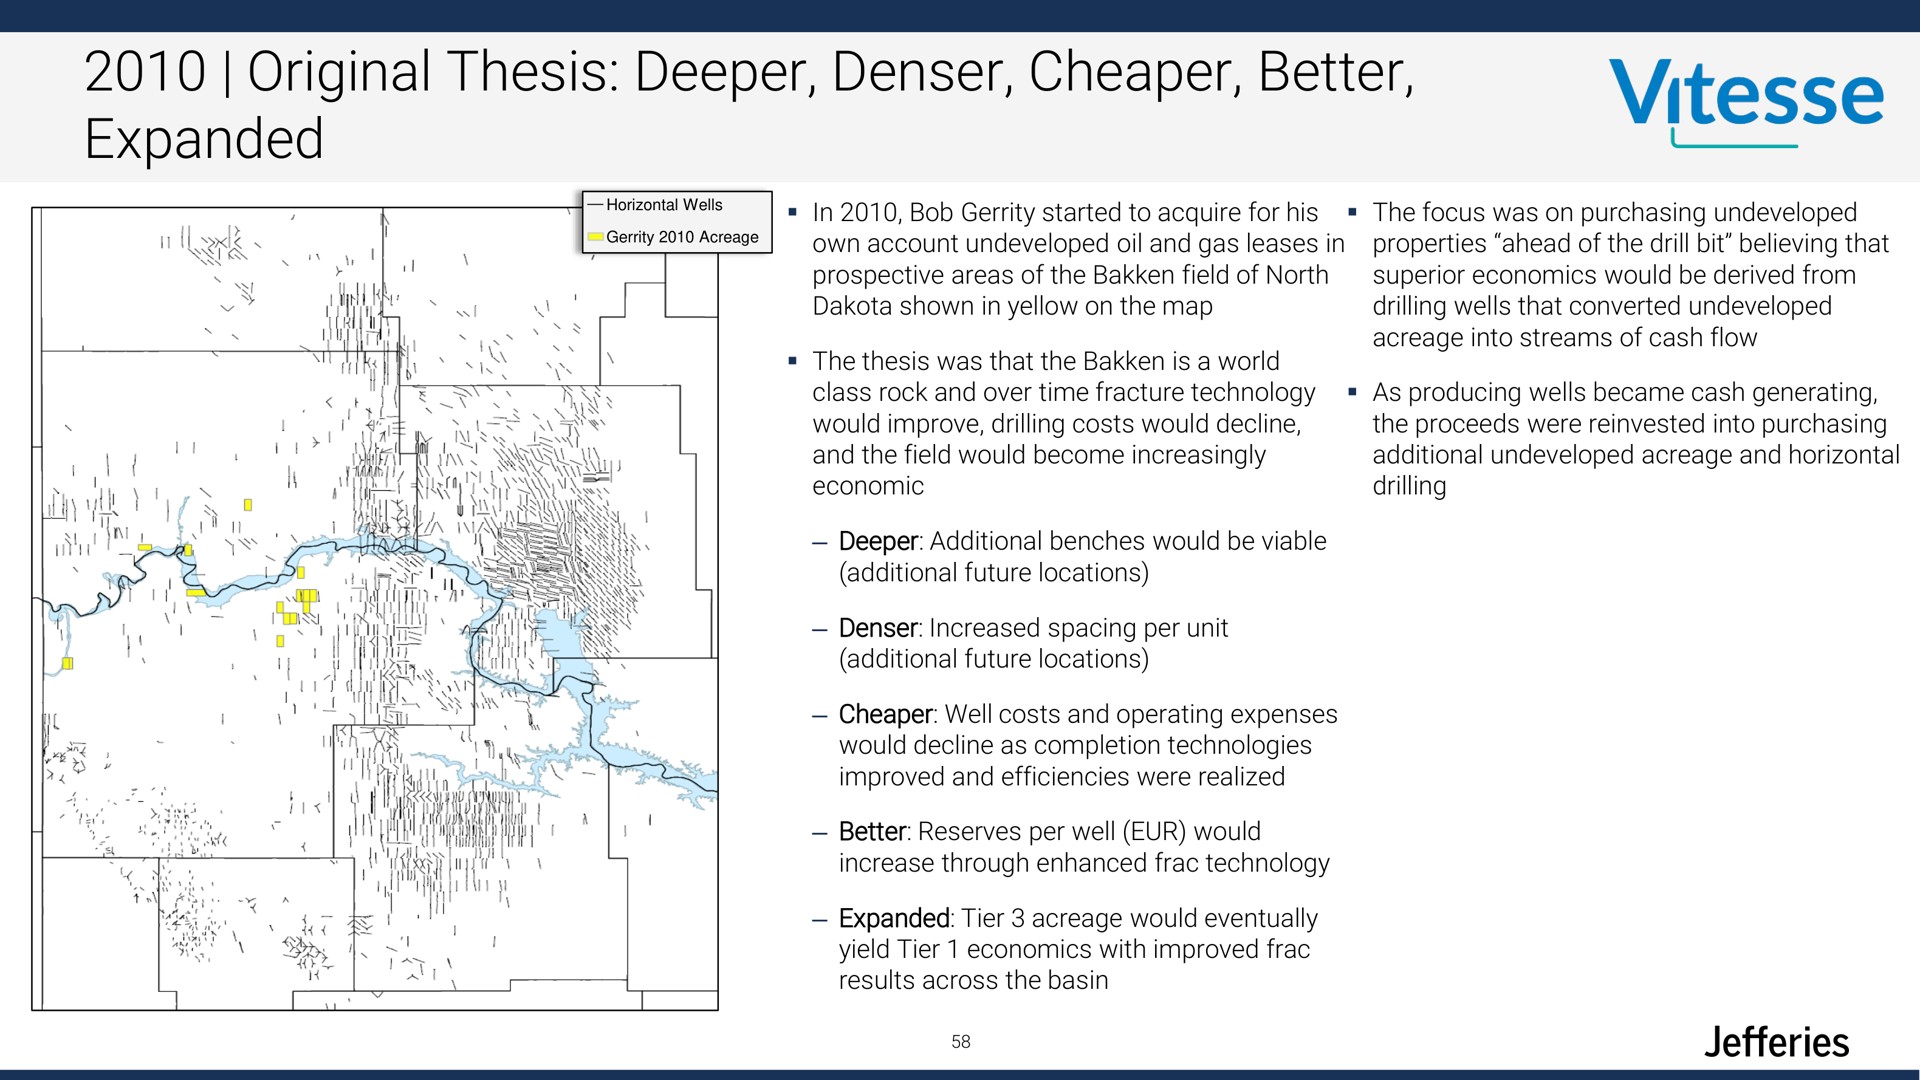 original thesis better expanded | Jefferies Financial Group